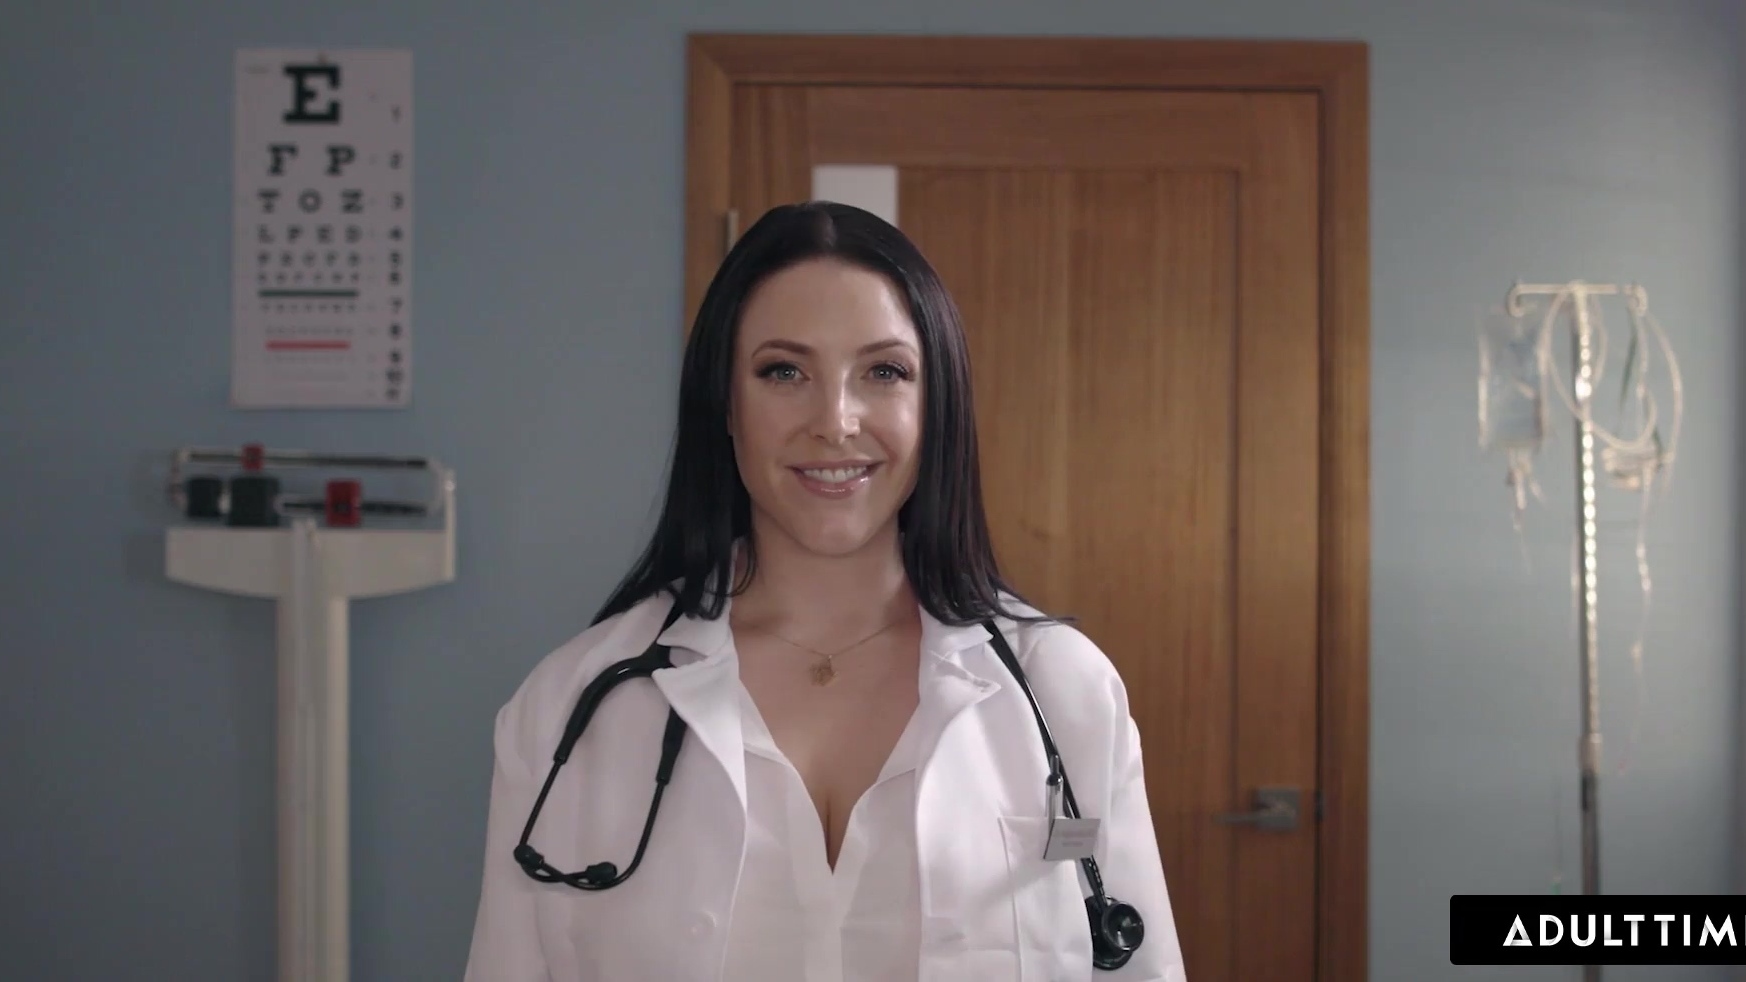 don brouwer recommends Doctor Angela White